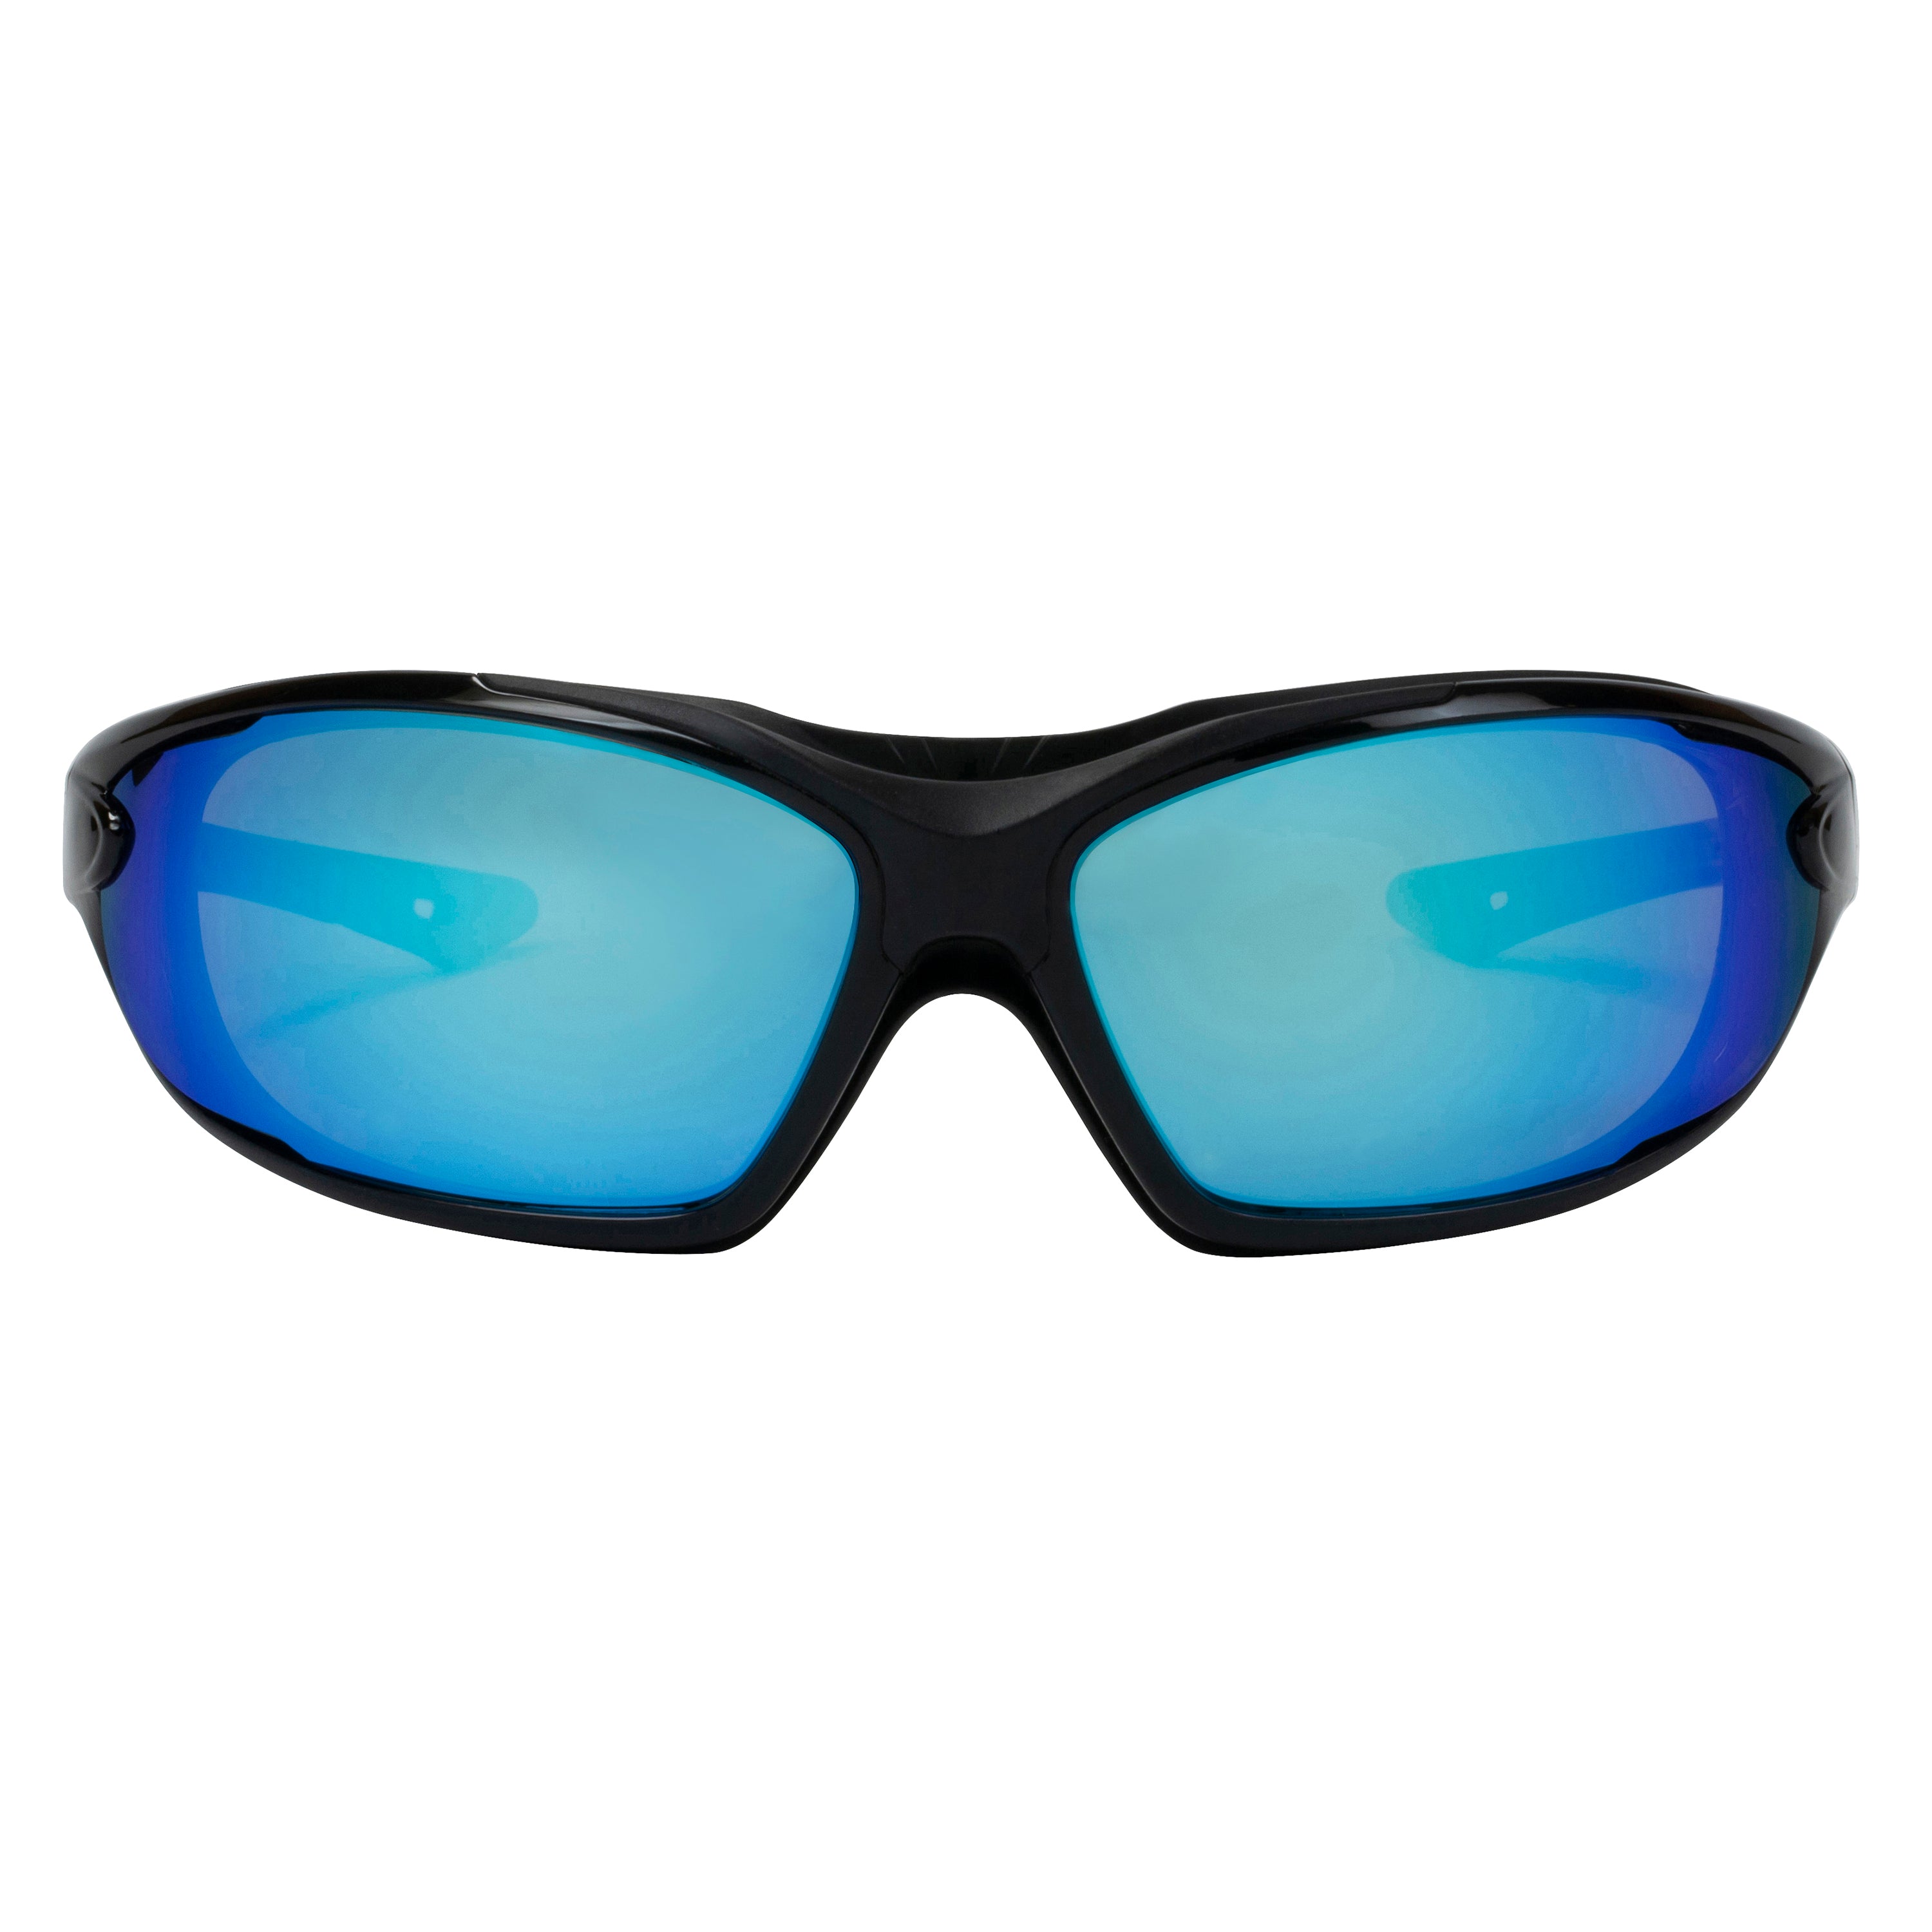 Polycarbonate Polarized Blue Mirror Lens Sport Safety Sunglasses with Swappable Strap and Gasketed Goggle Padding.